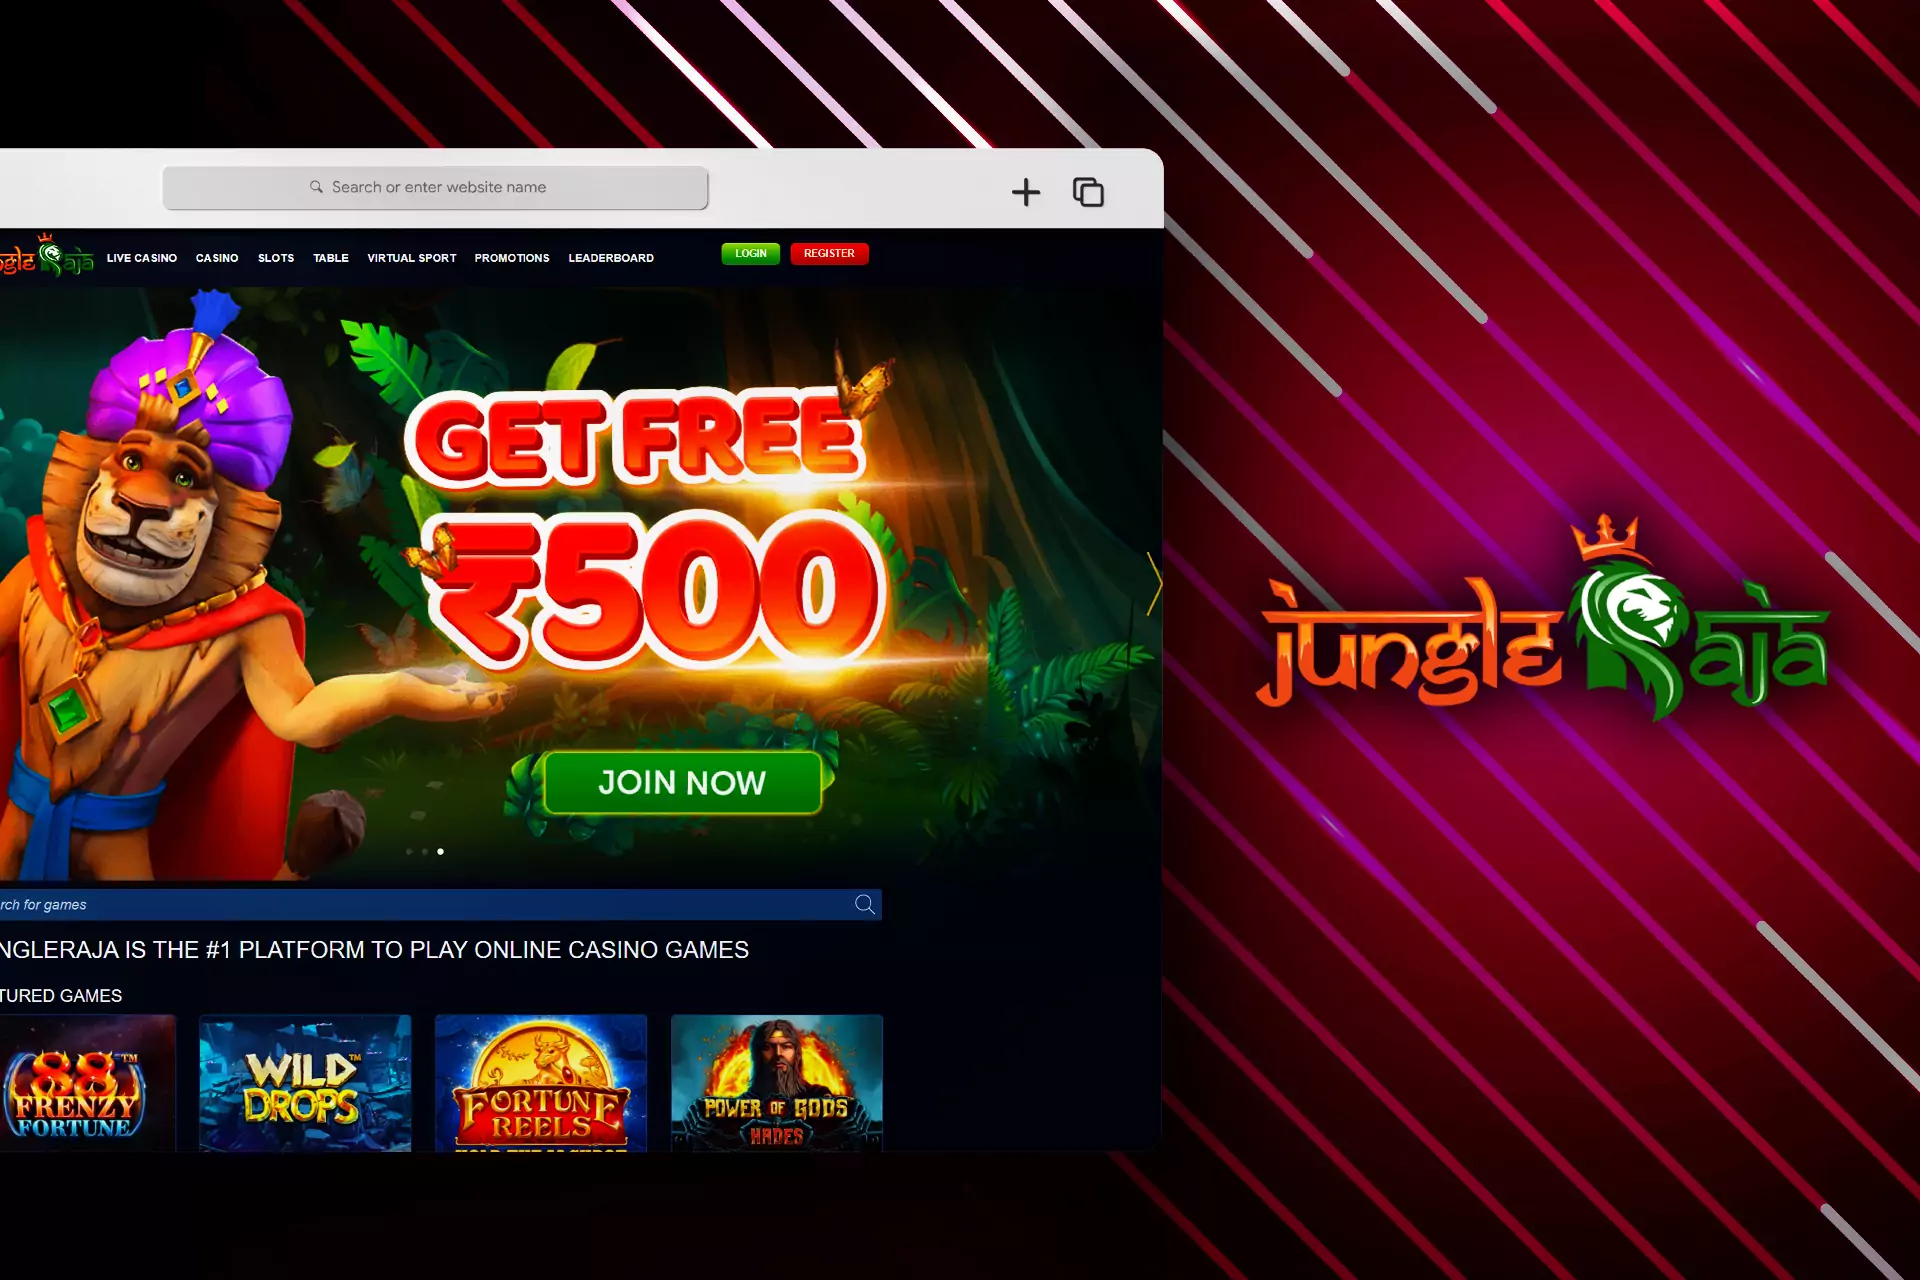 The target audience of JungleRaja is Indian players, so you should definitely try playing on this online casino site.